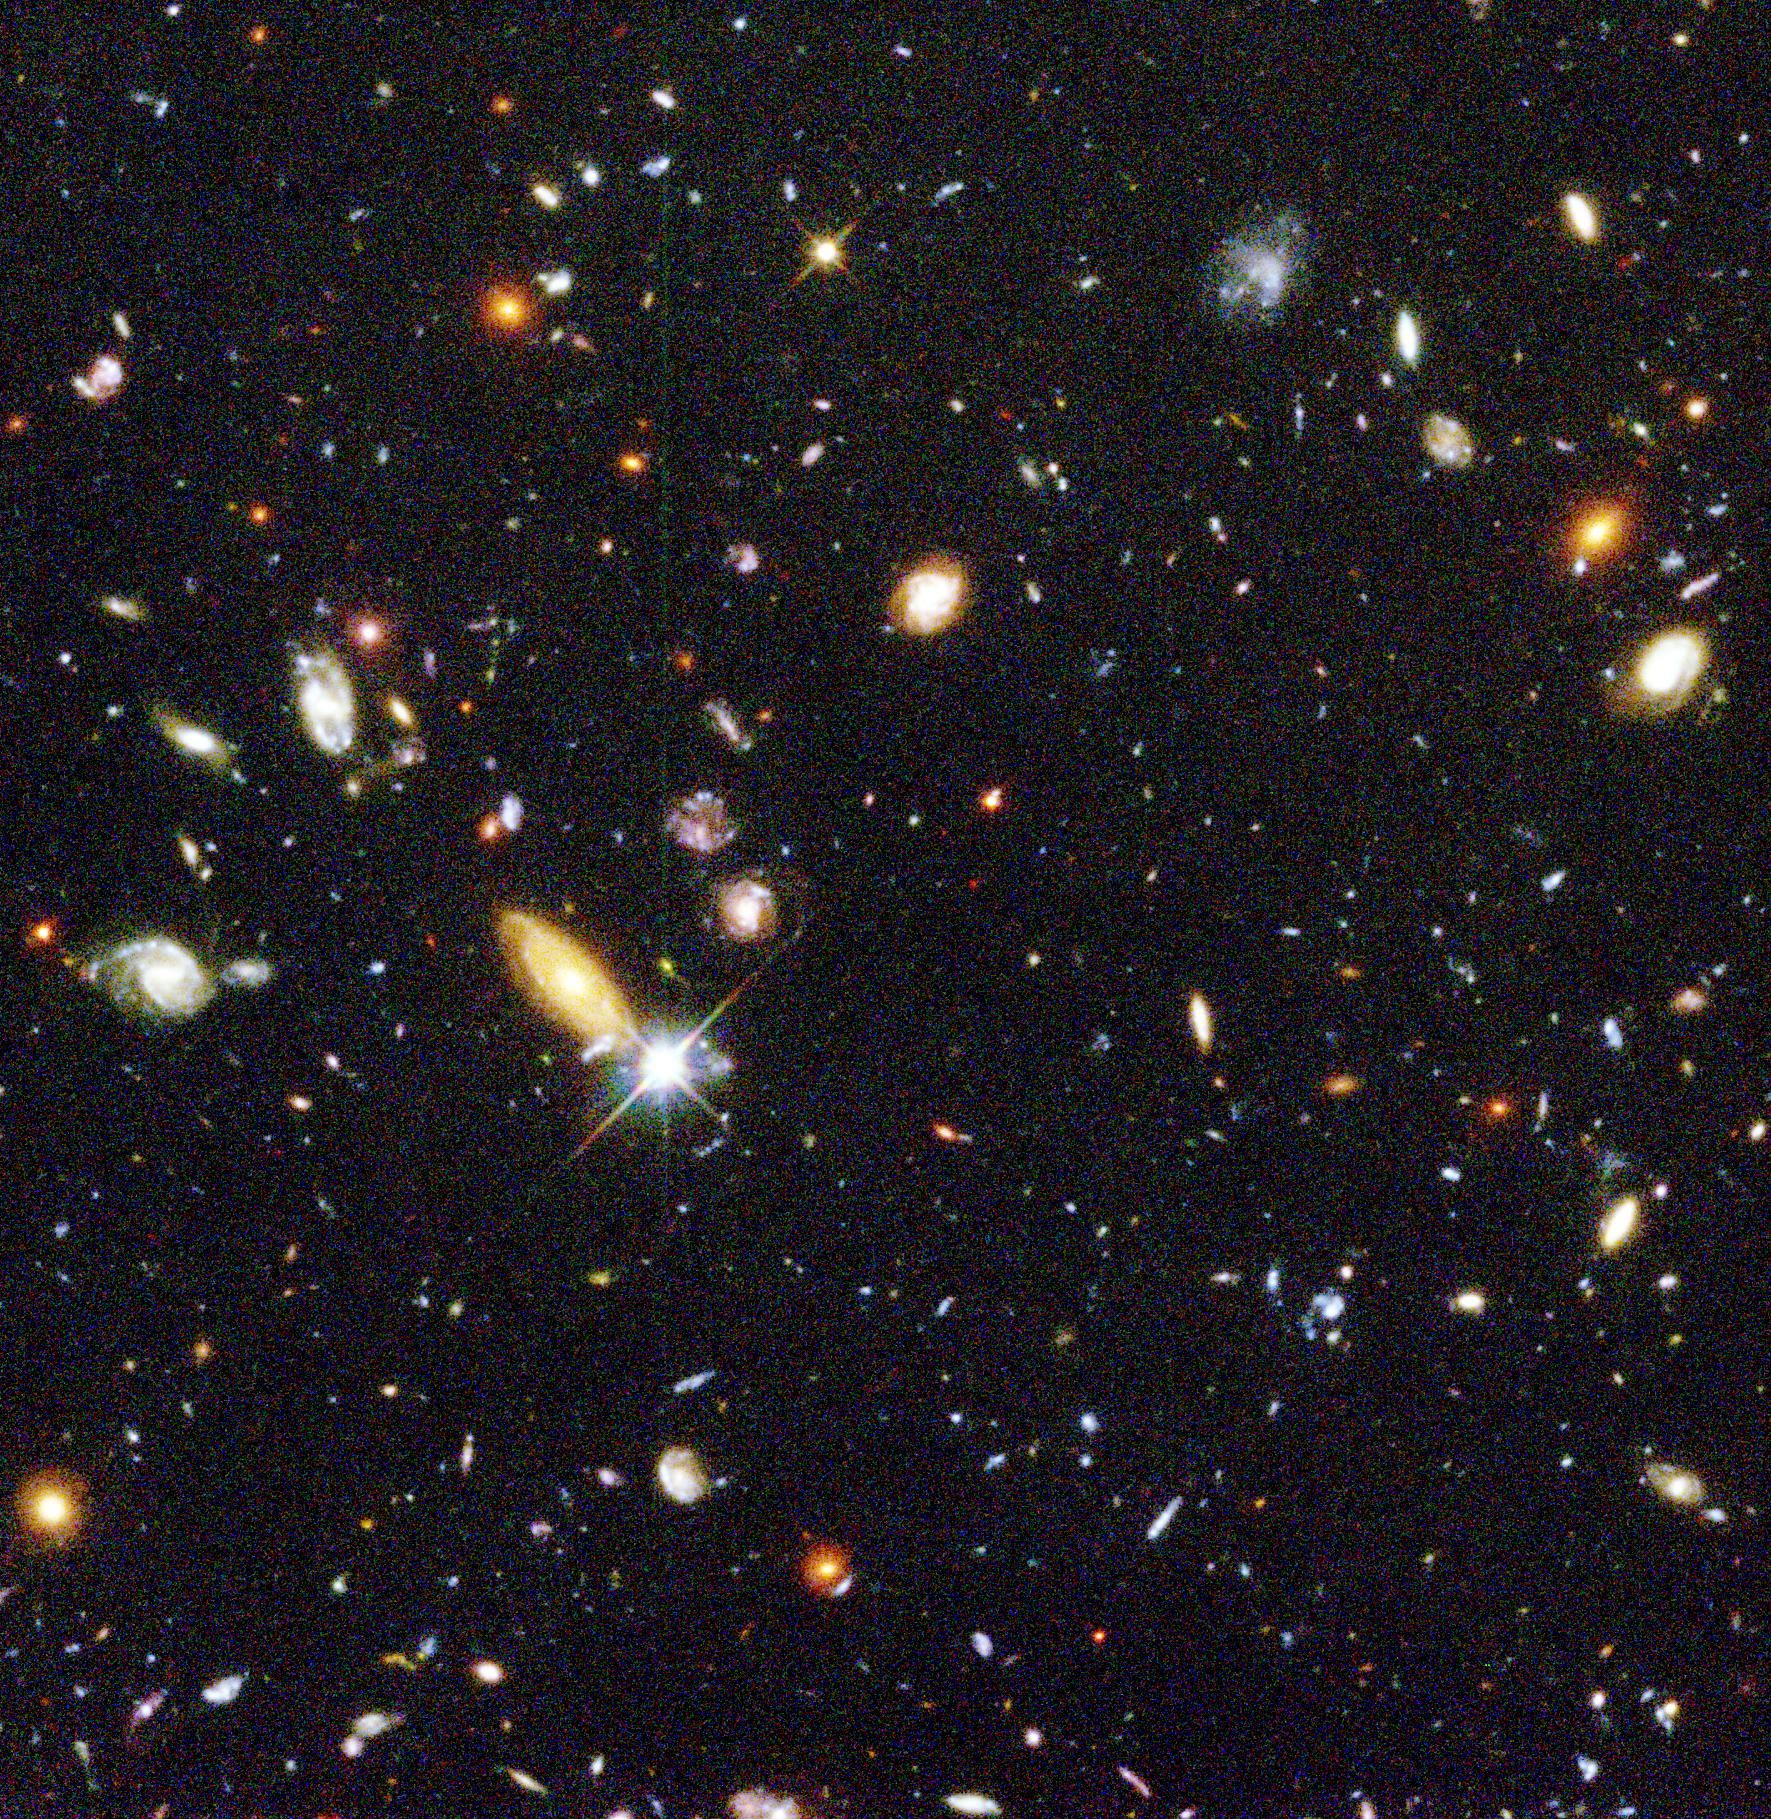 Space Image. Hubble Deep Field Image Unveils Myriad Galaxies